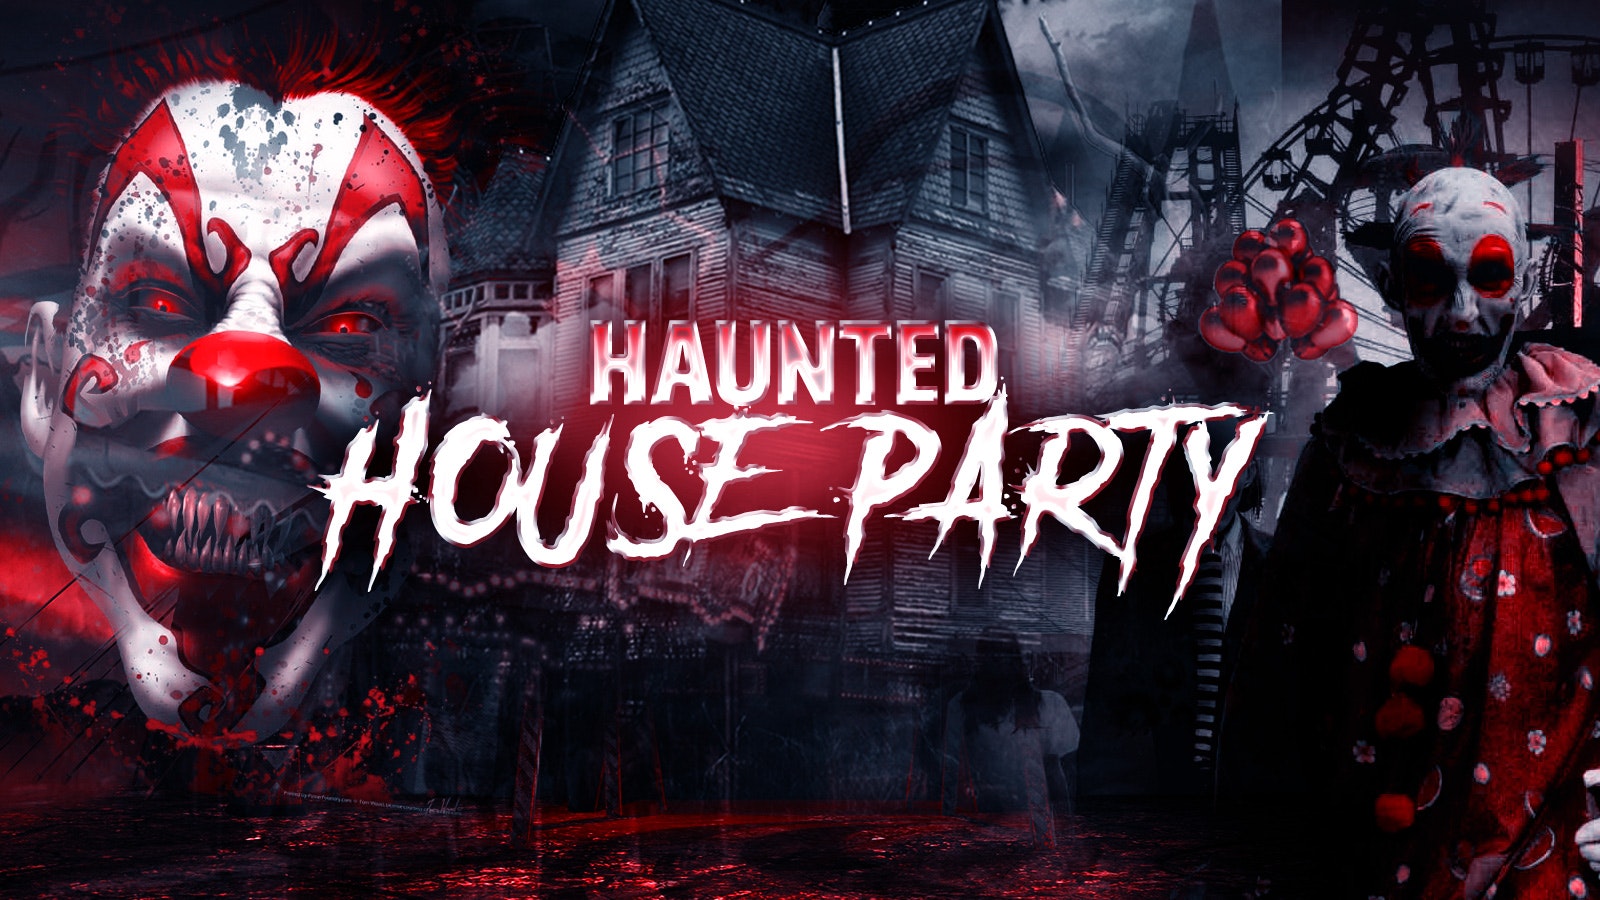 The Haunted House Party | Sheffield Halloween 2021 – CANCELLED